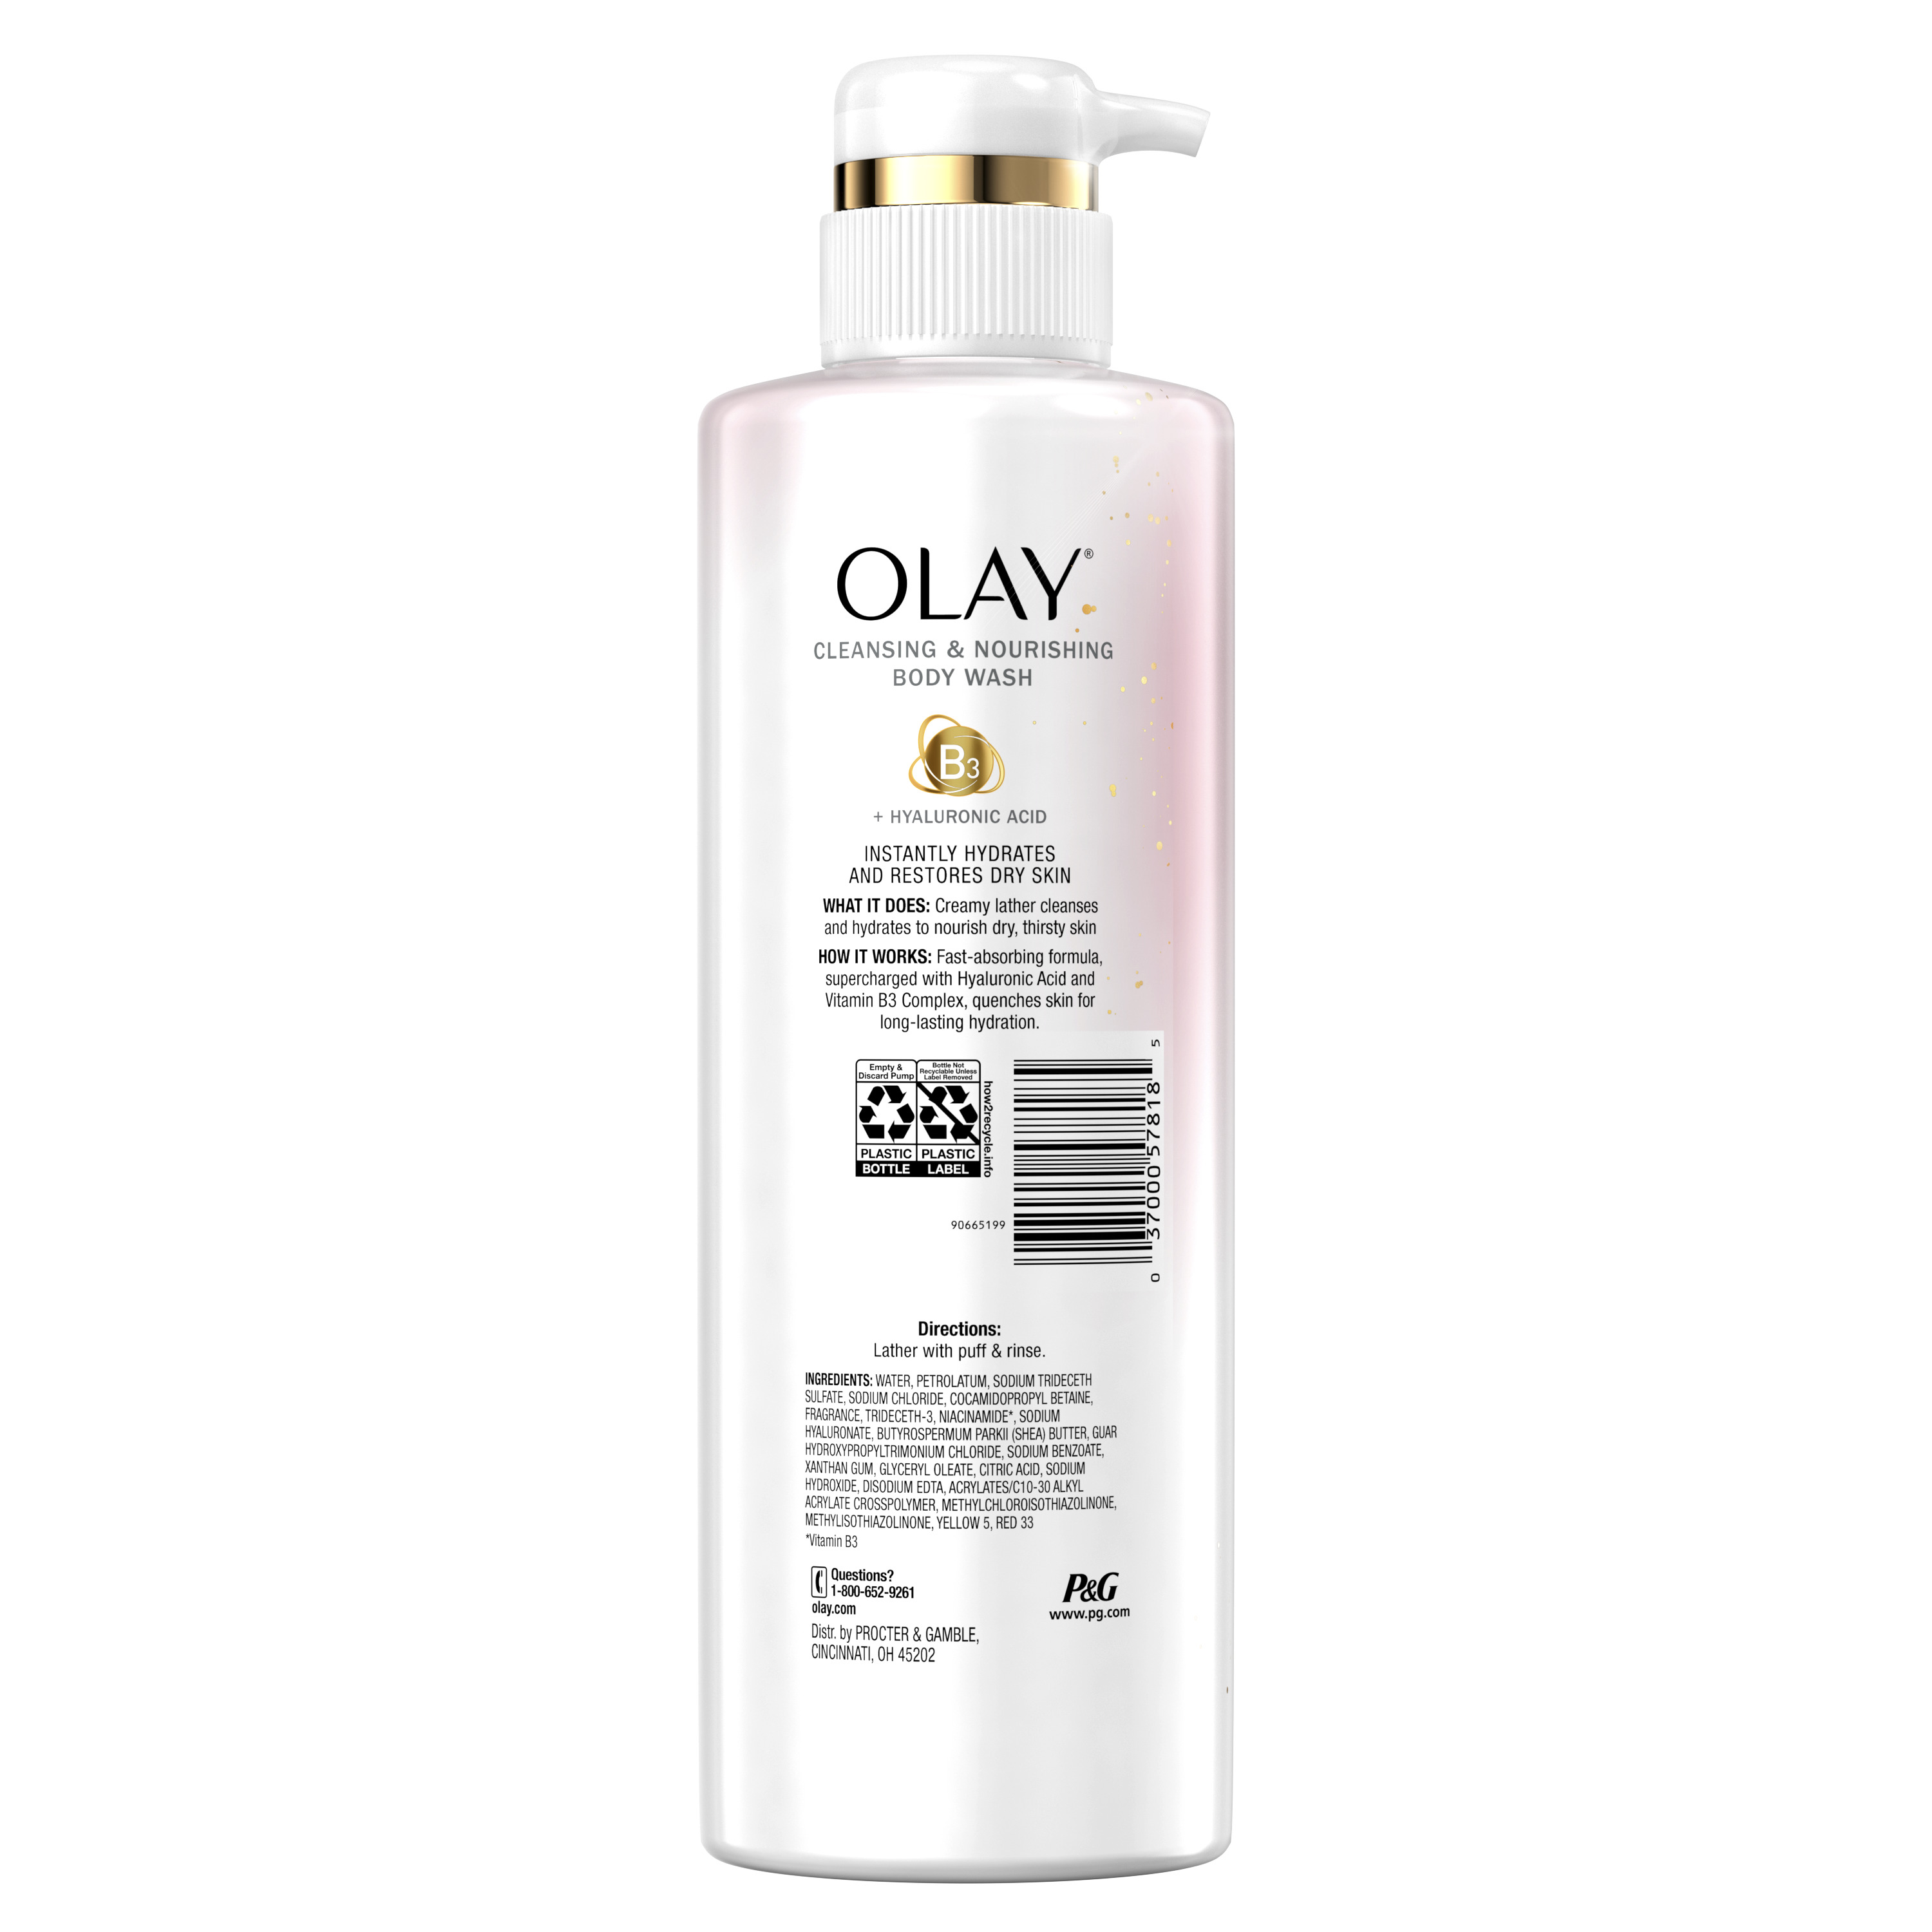 Olay Cleansing & Nourishing Body Wash with Vitamin B3 and Hyaluronic Acid, 17.9 fl oz - image 3 of 6